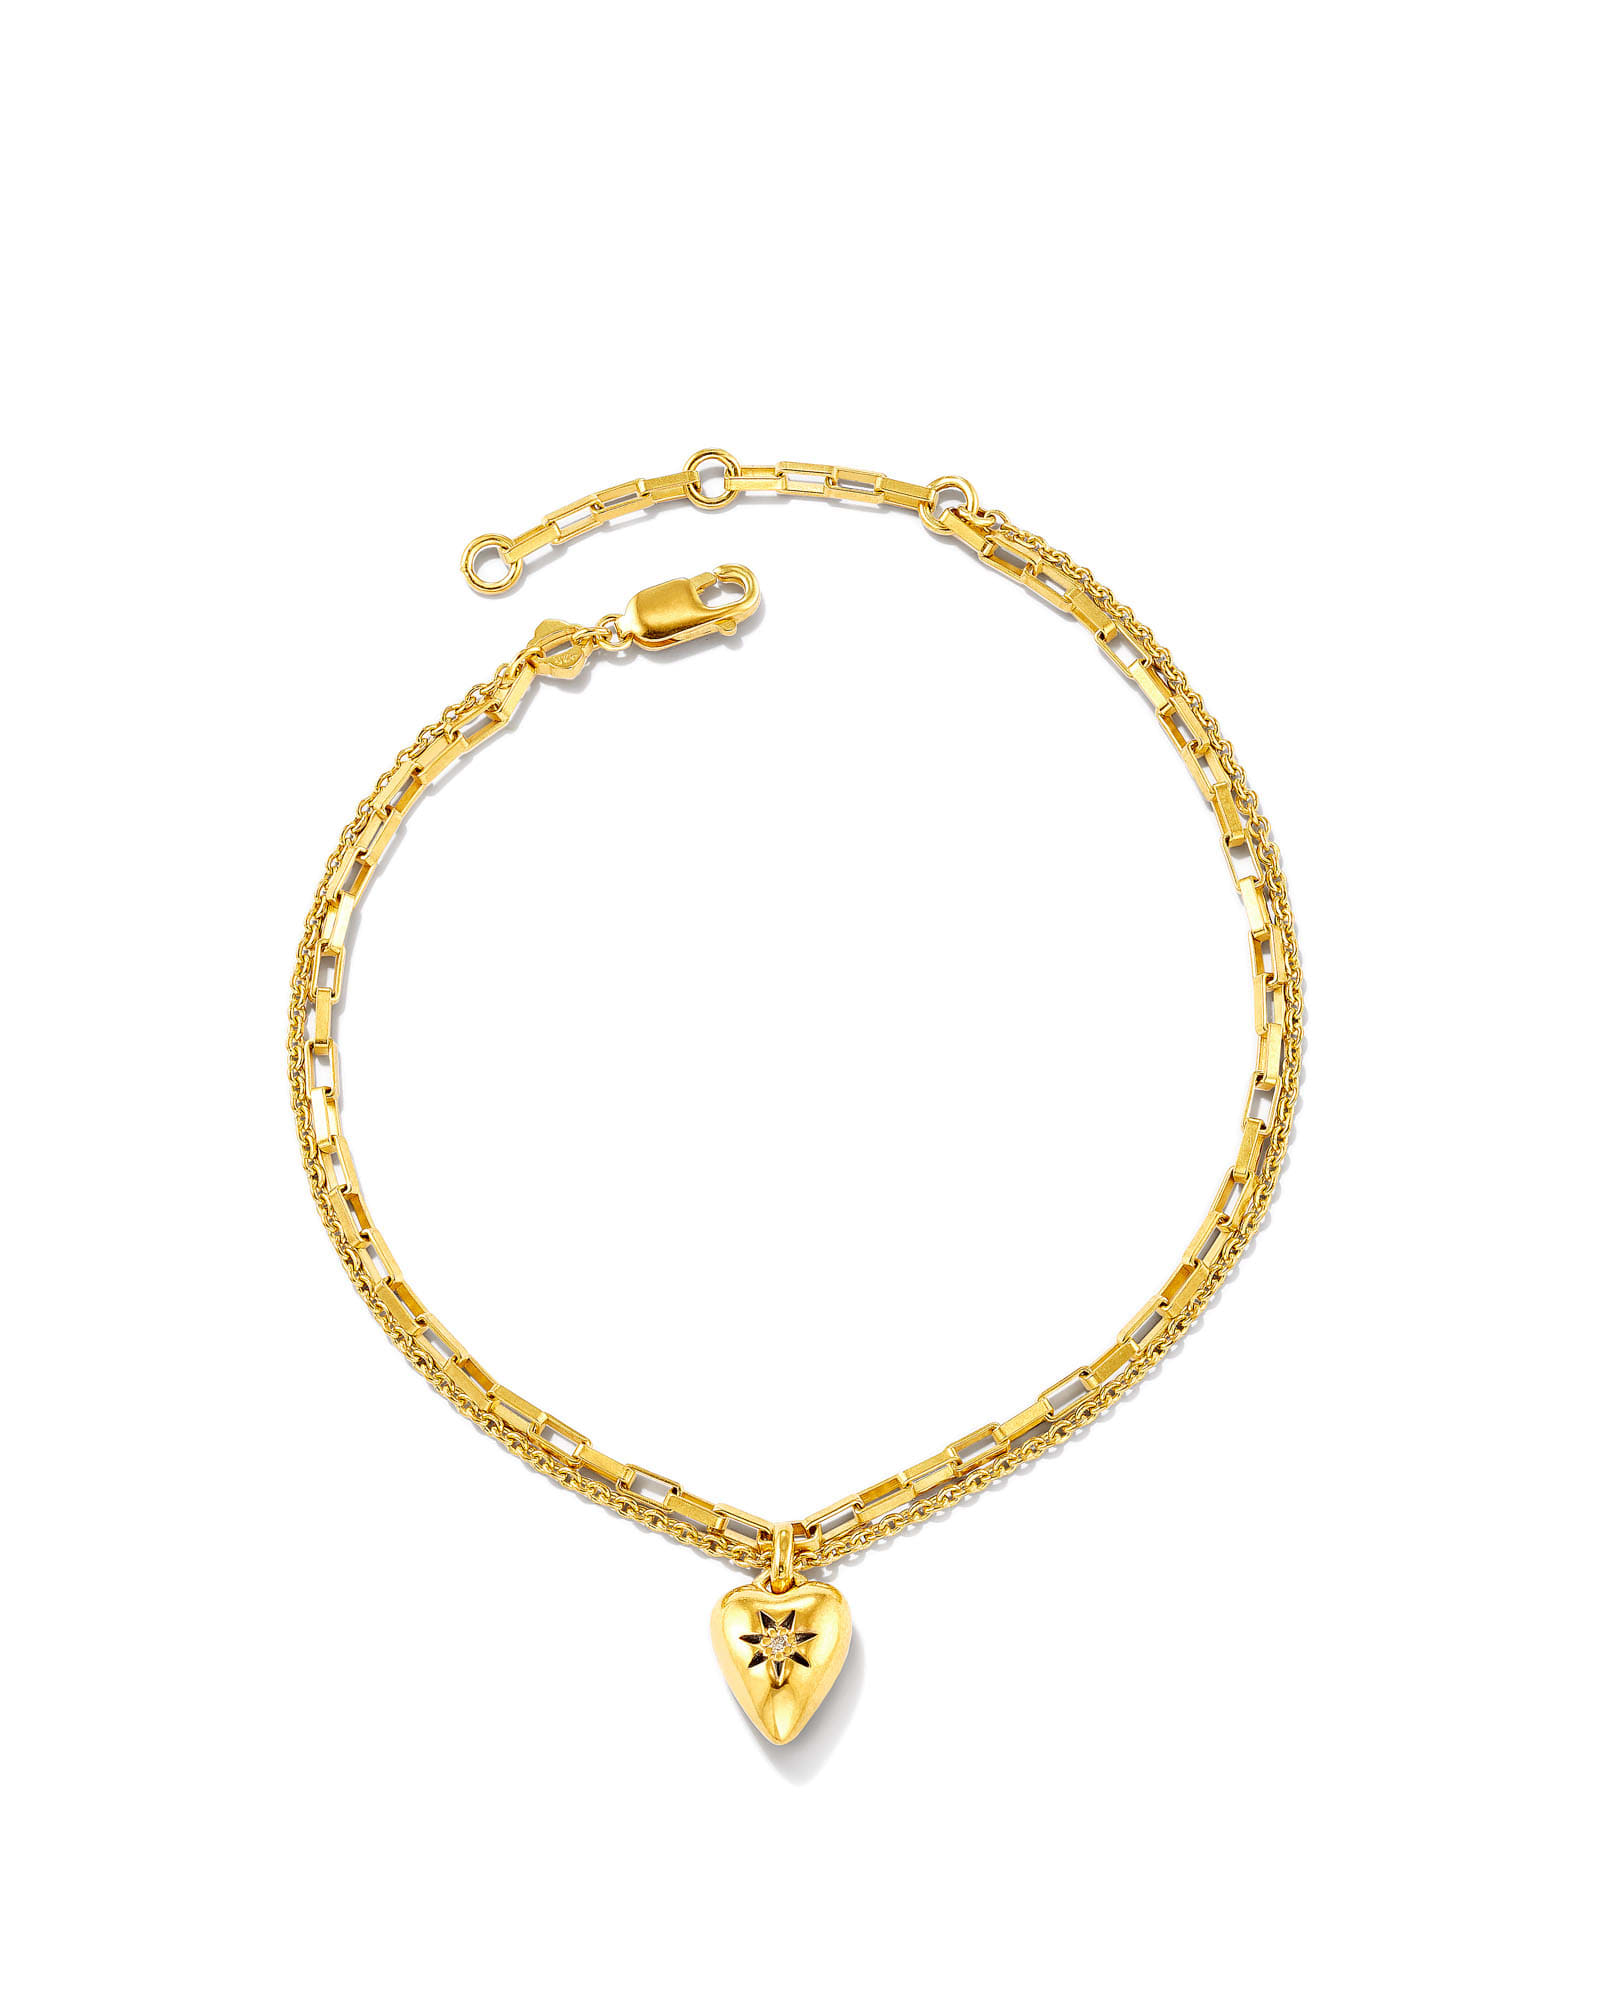 Angie Heart Bright Cut Chain Bracelet in 18k Yellow Gold Vermeil